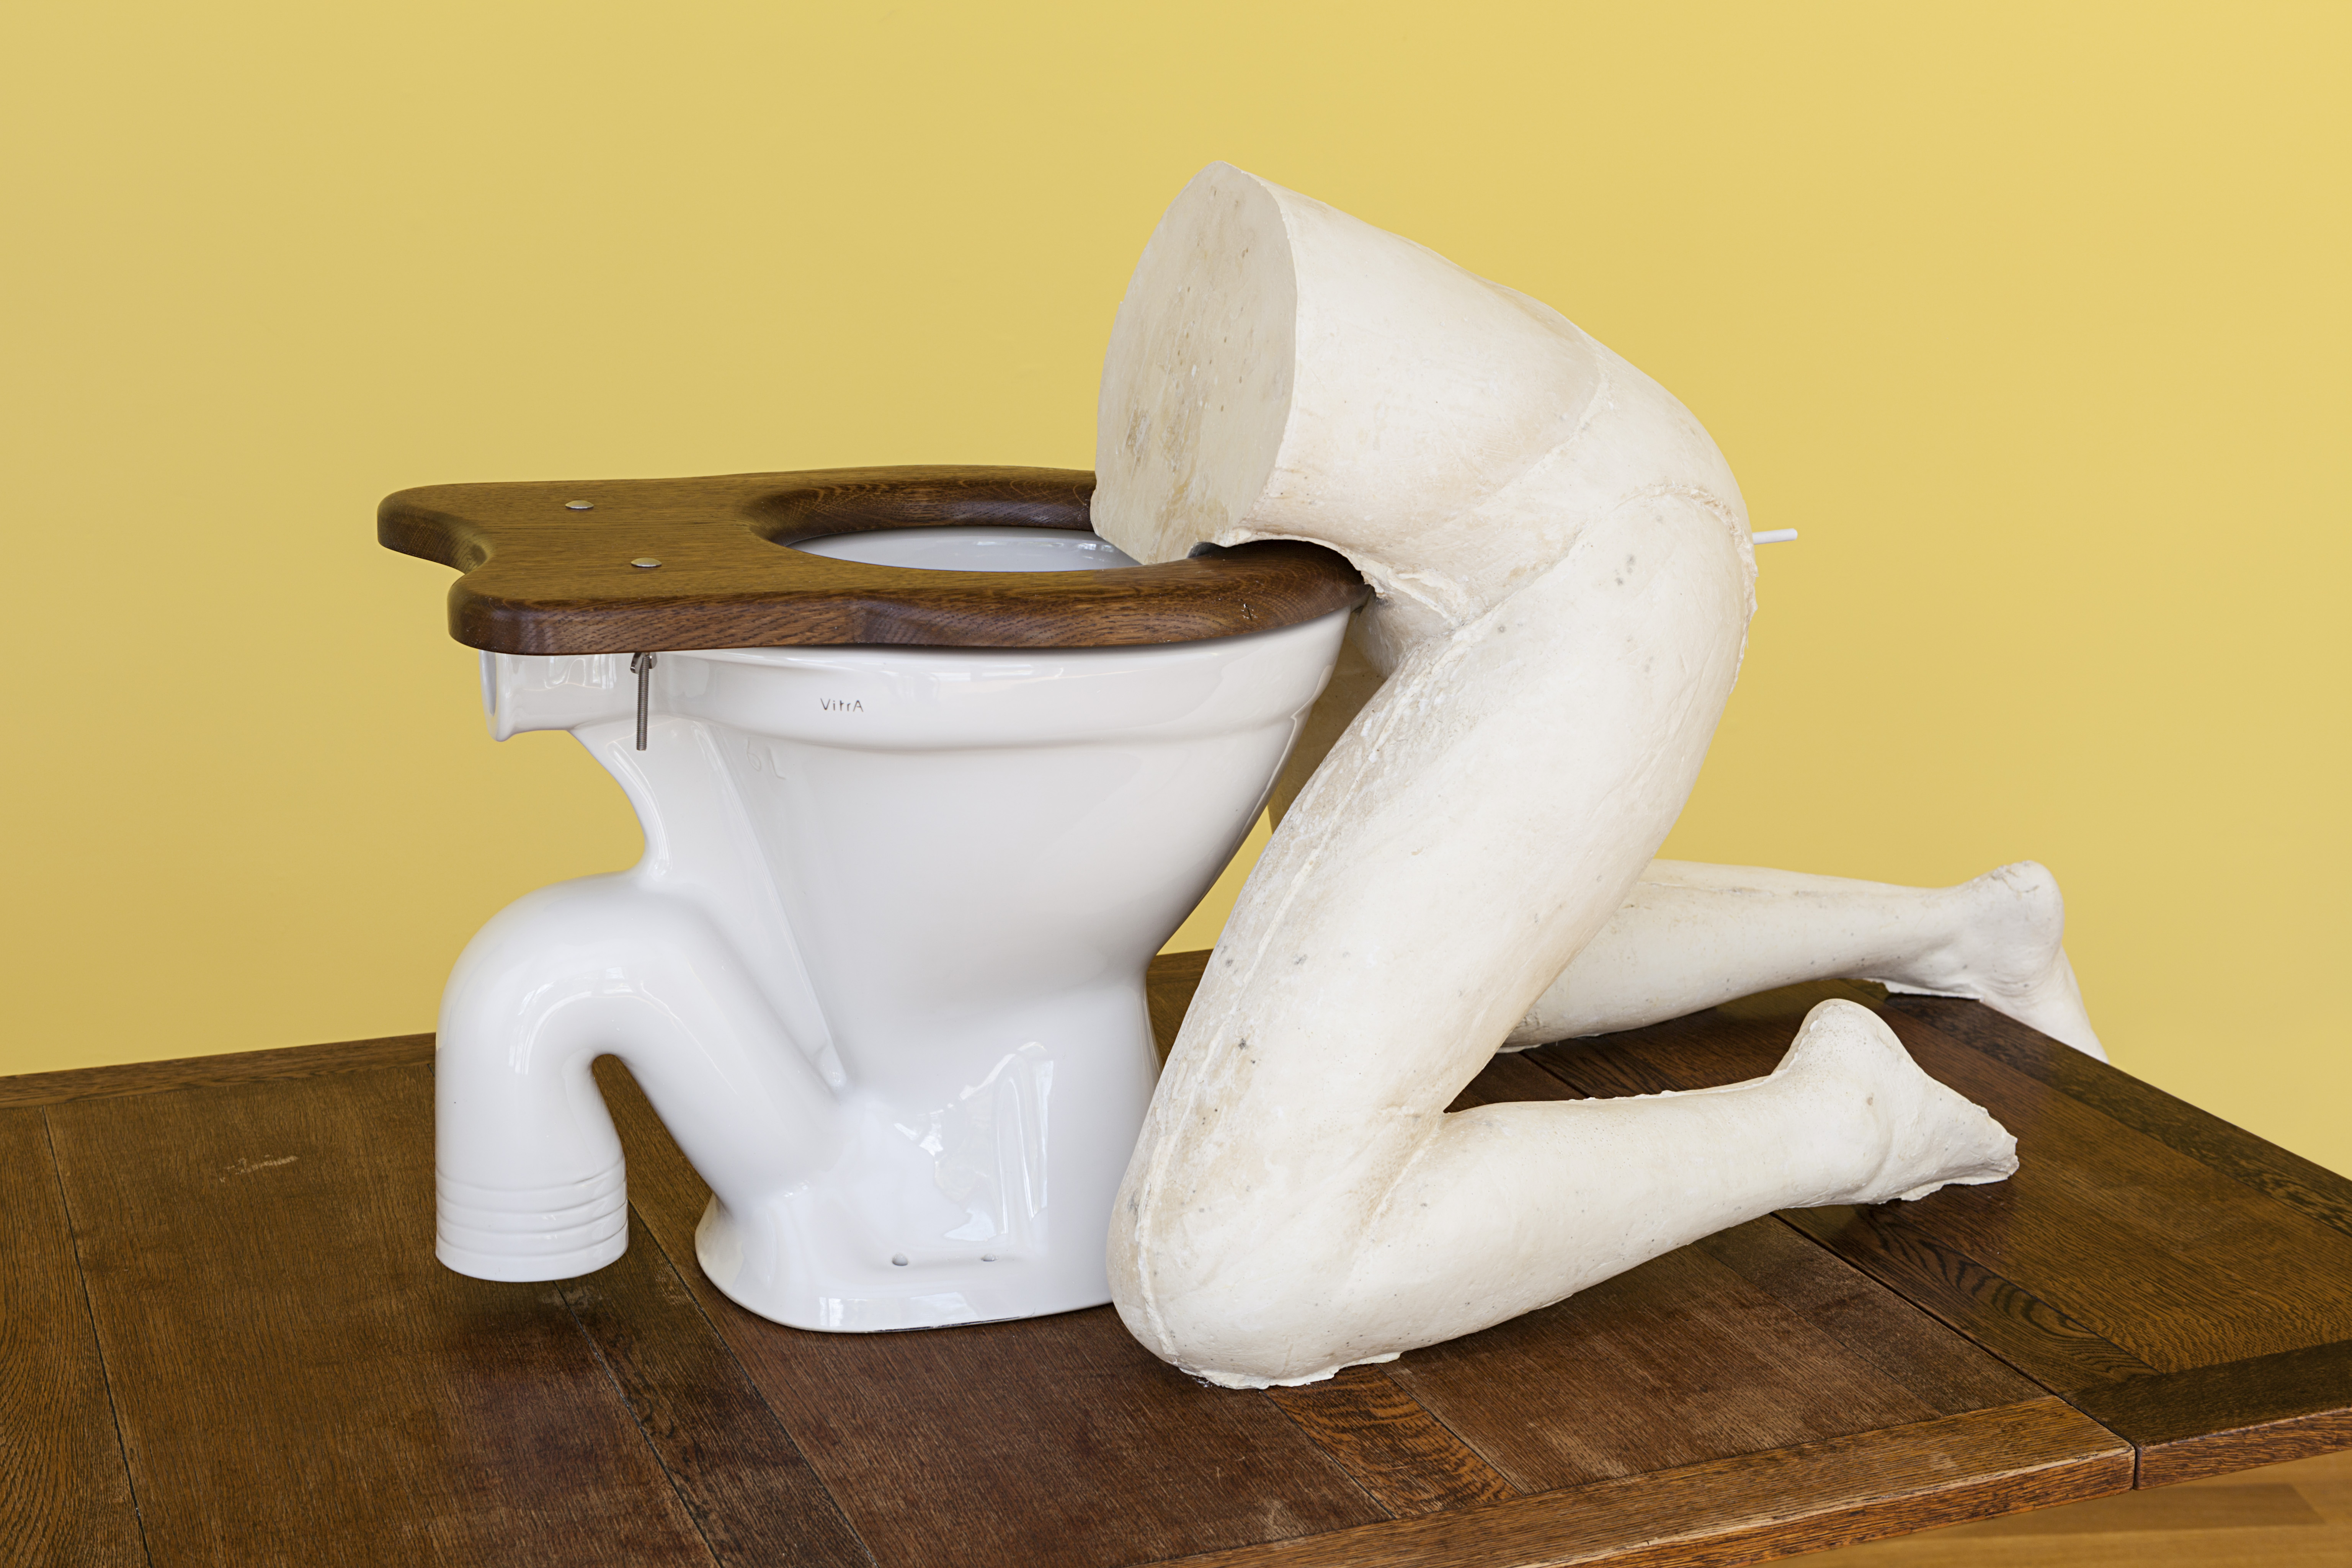 Sarah Lucas, Edith, 2015. Plaster, cigarette, toilet, and table, 54 3/4 x 73 5/8 x 38 3/4 